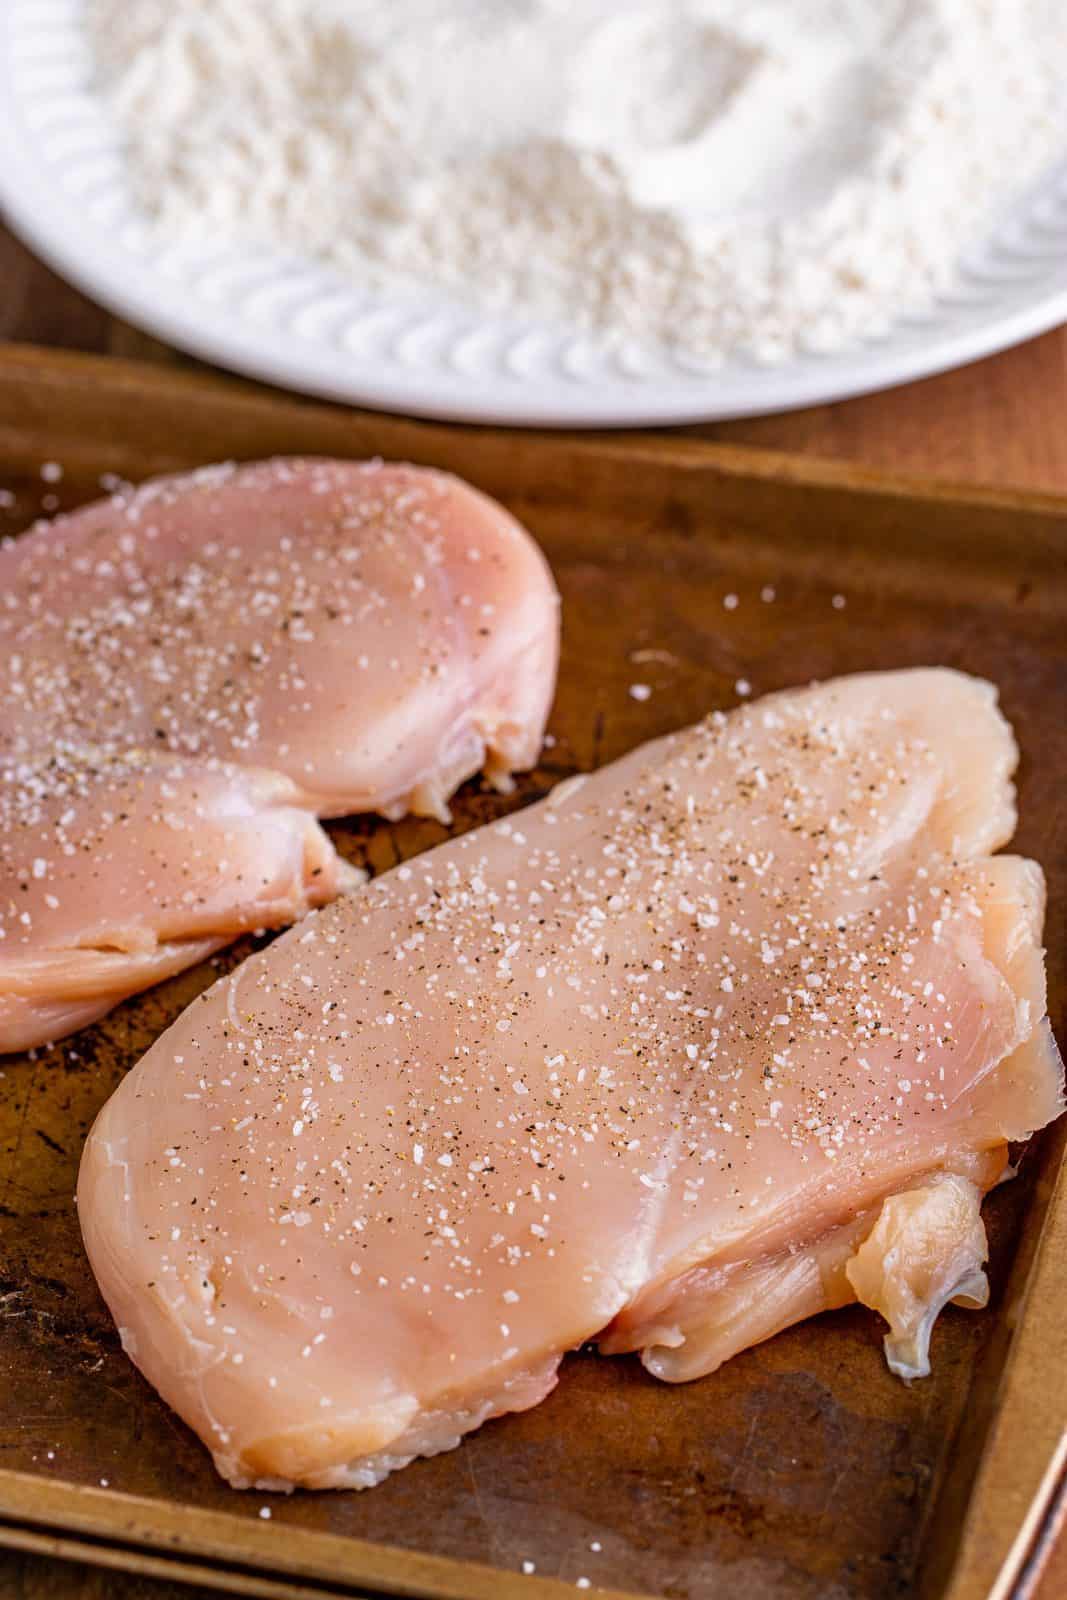 Chicken breasts seasoned with salt and pepper.